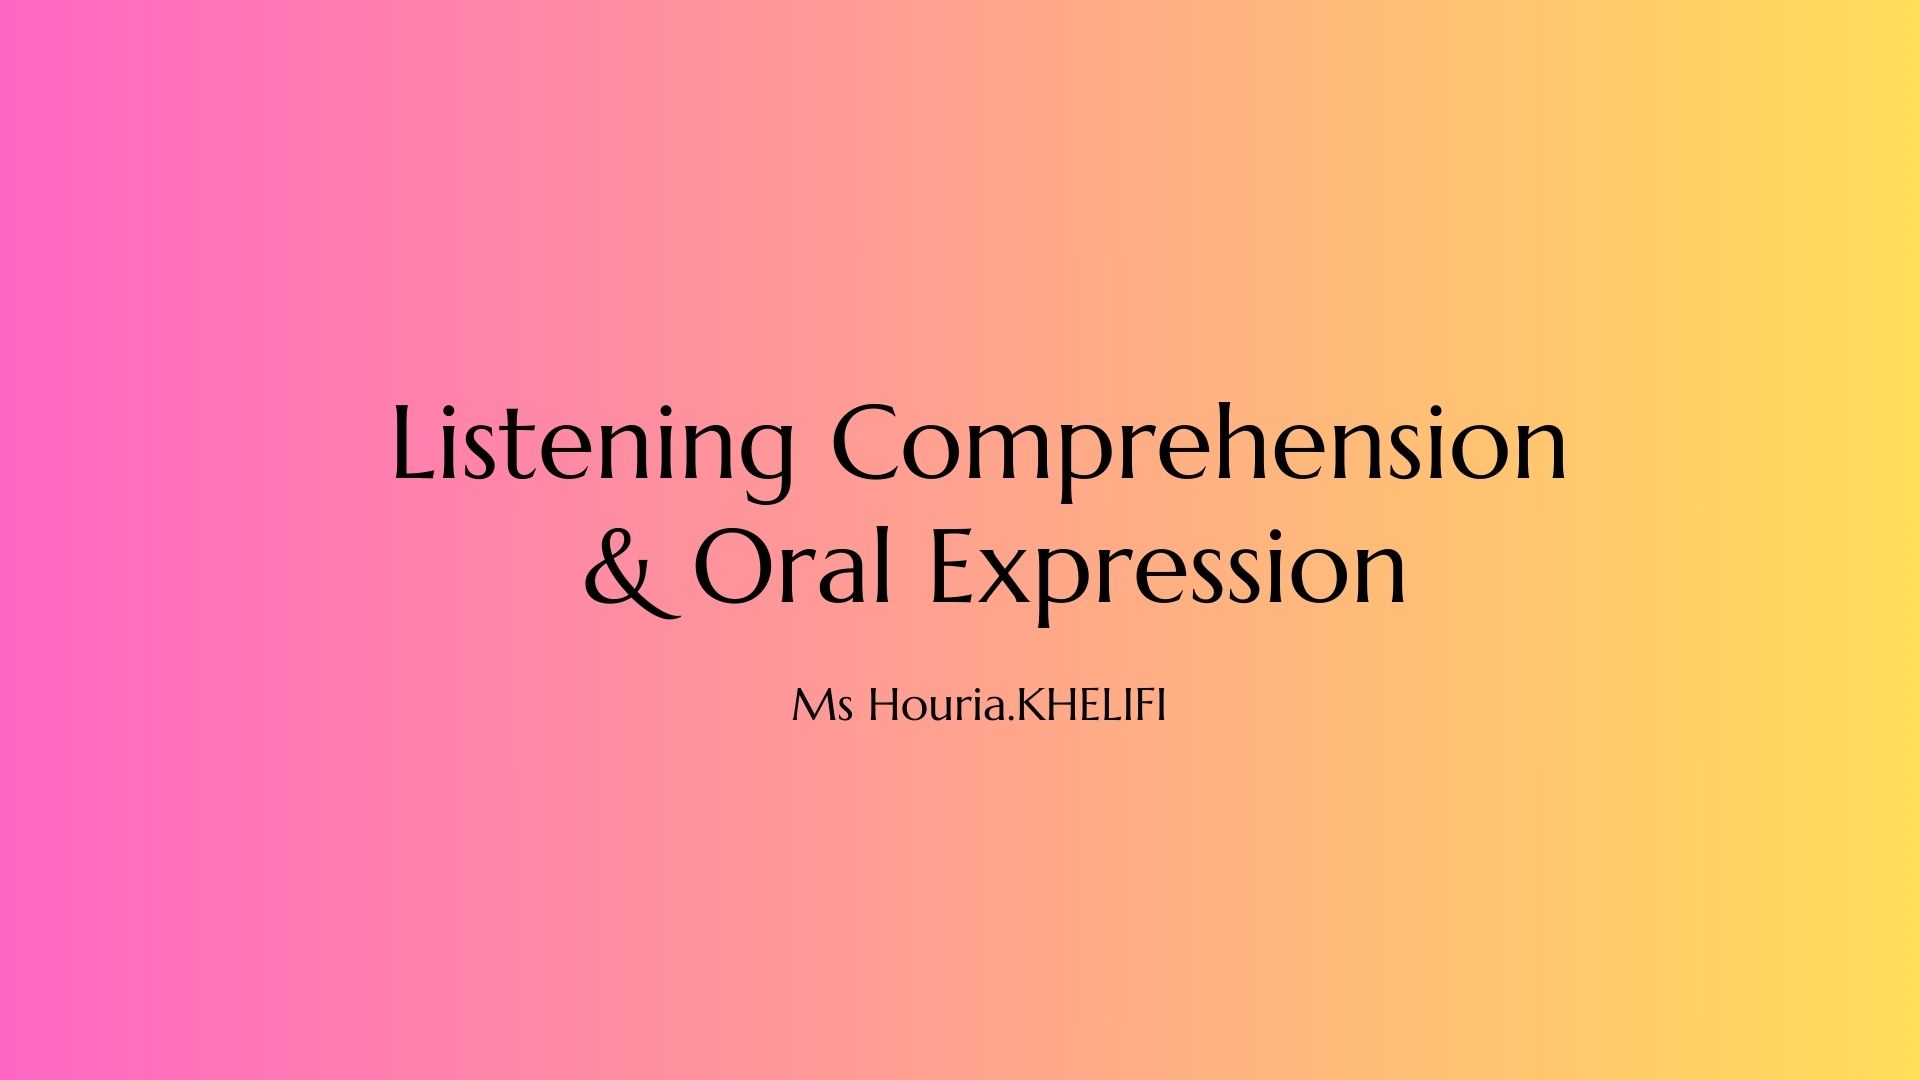 ORAL EXPRESSION